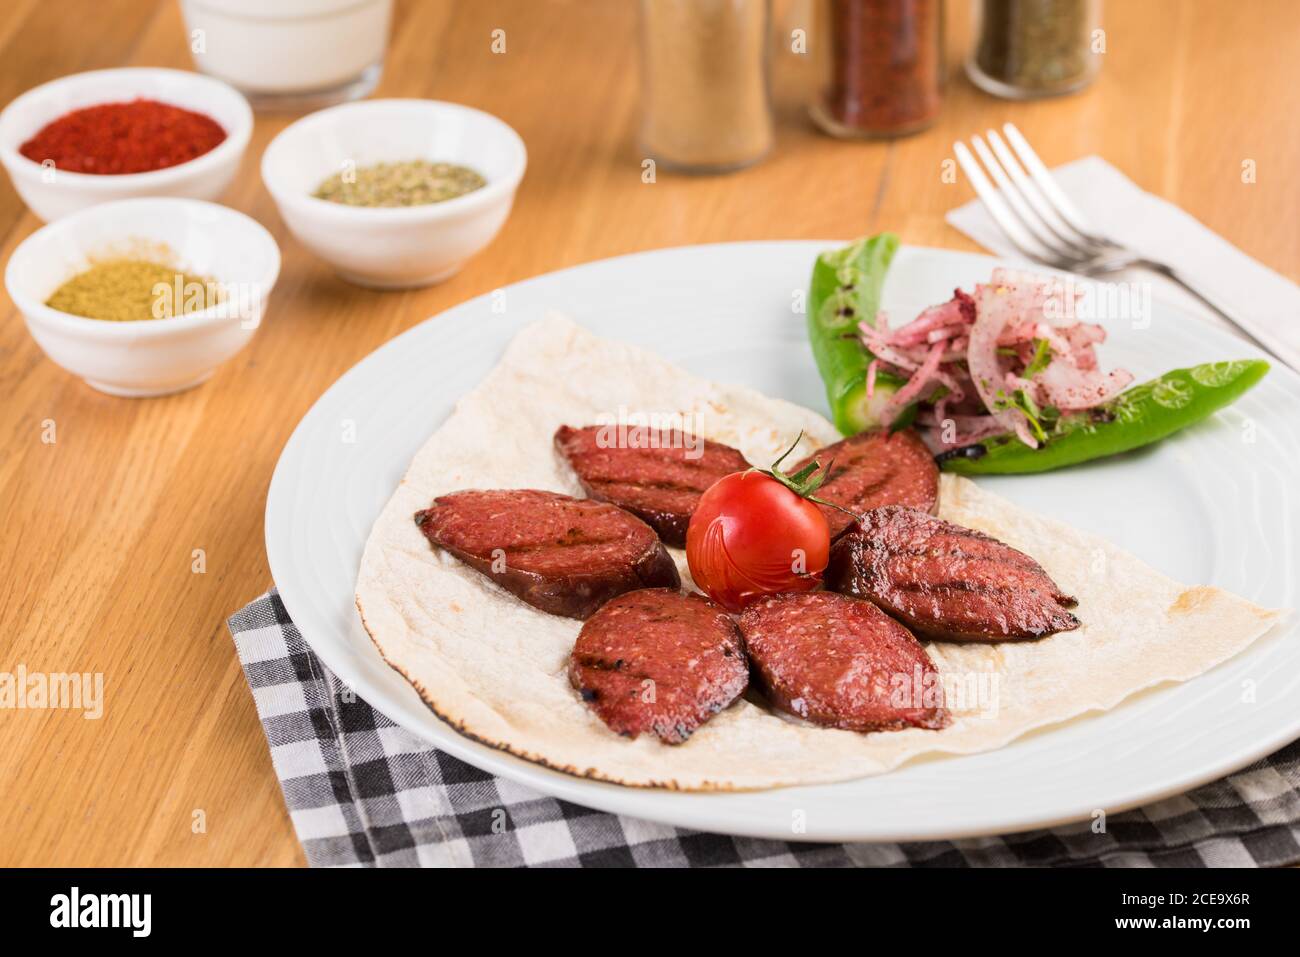 Sliced Turkish sausage on white plate cooked on the grill Stock Photo